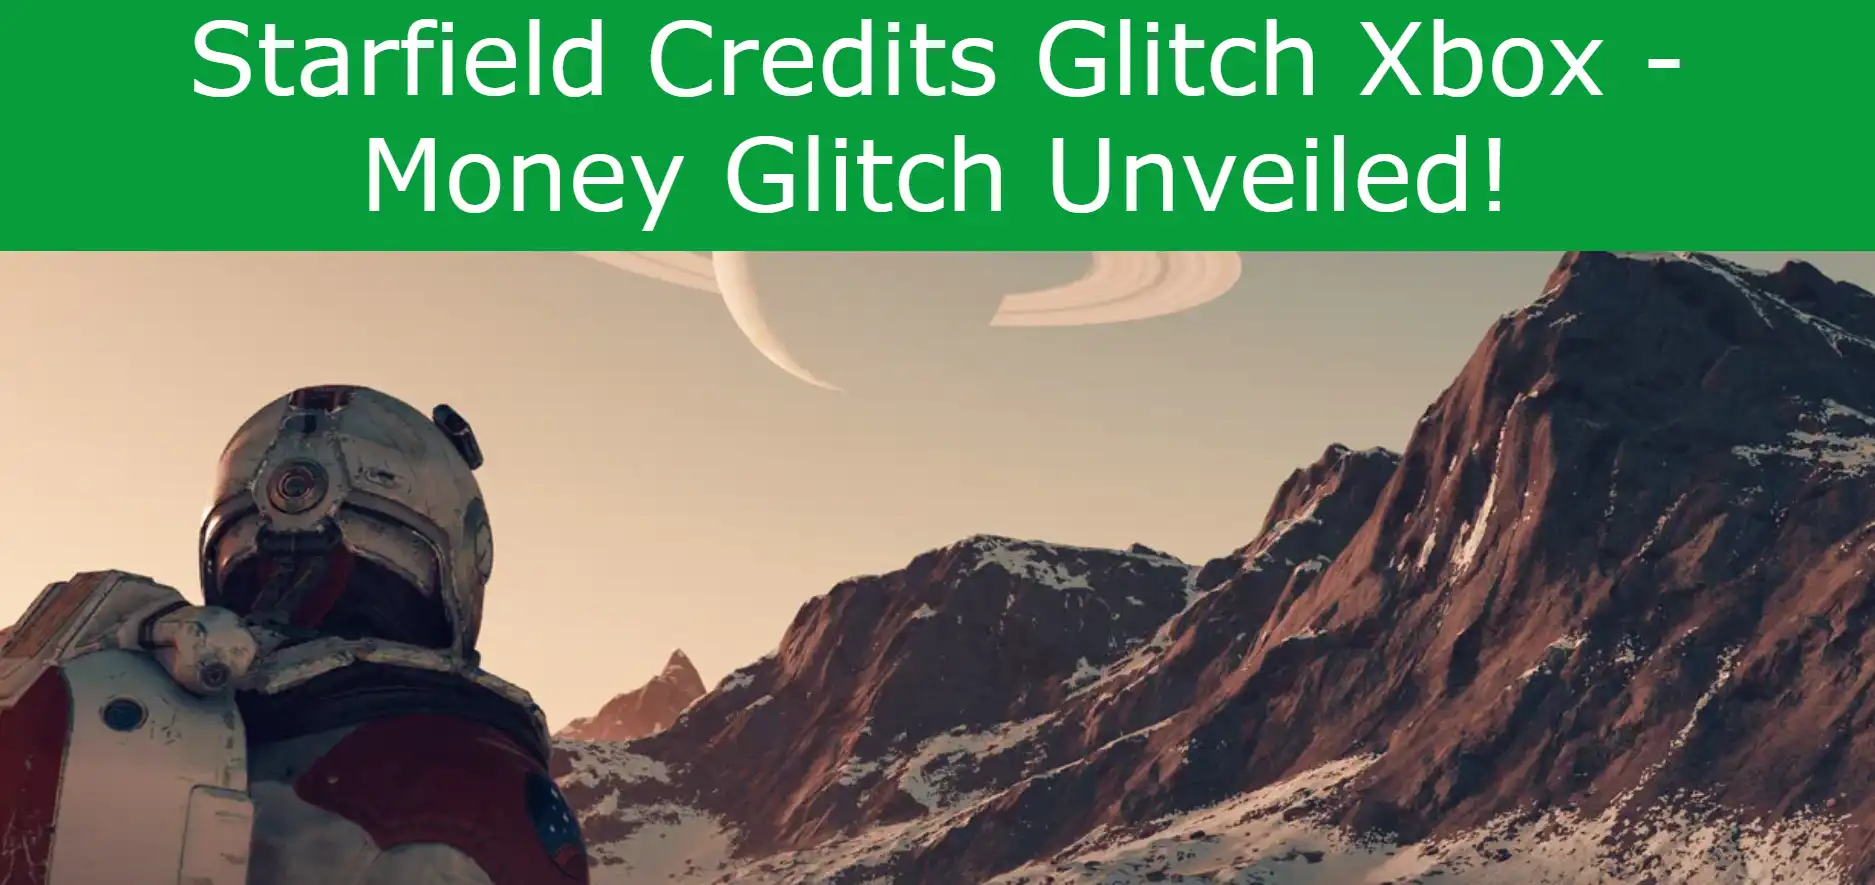 You are currently viewing Starfield Credits Glitch Xbox – Money Glitch Unveiled!